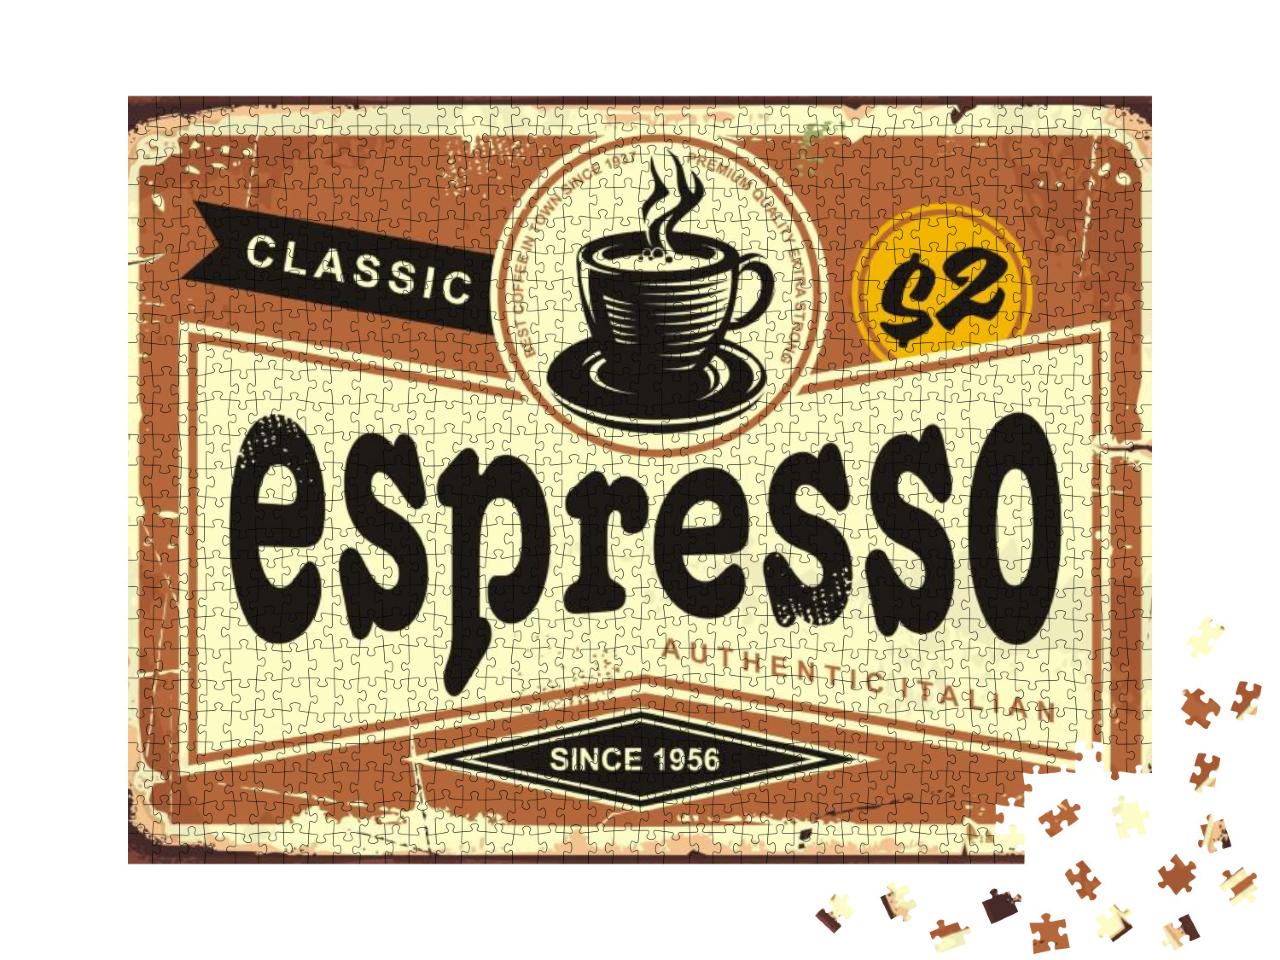 Authentic Italian Espresso Vintage Tin Sign Advertise. Co... Jigsaw Puzzle with 1000 pieces